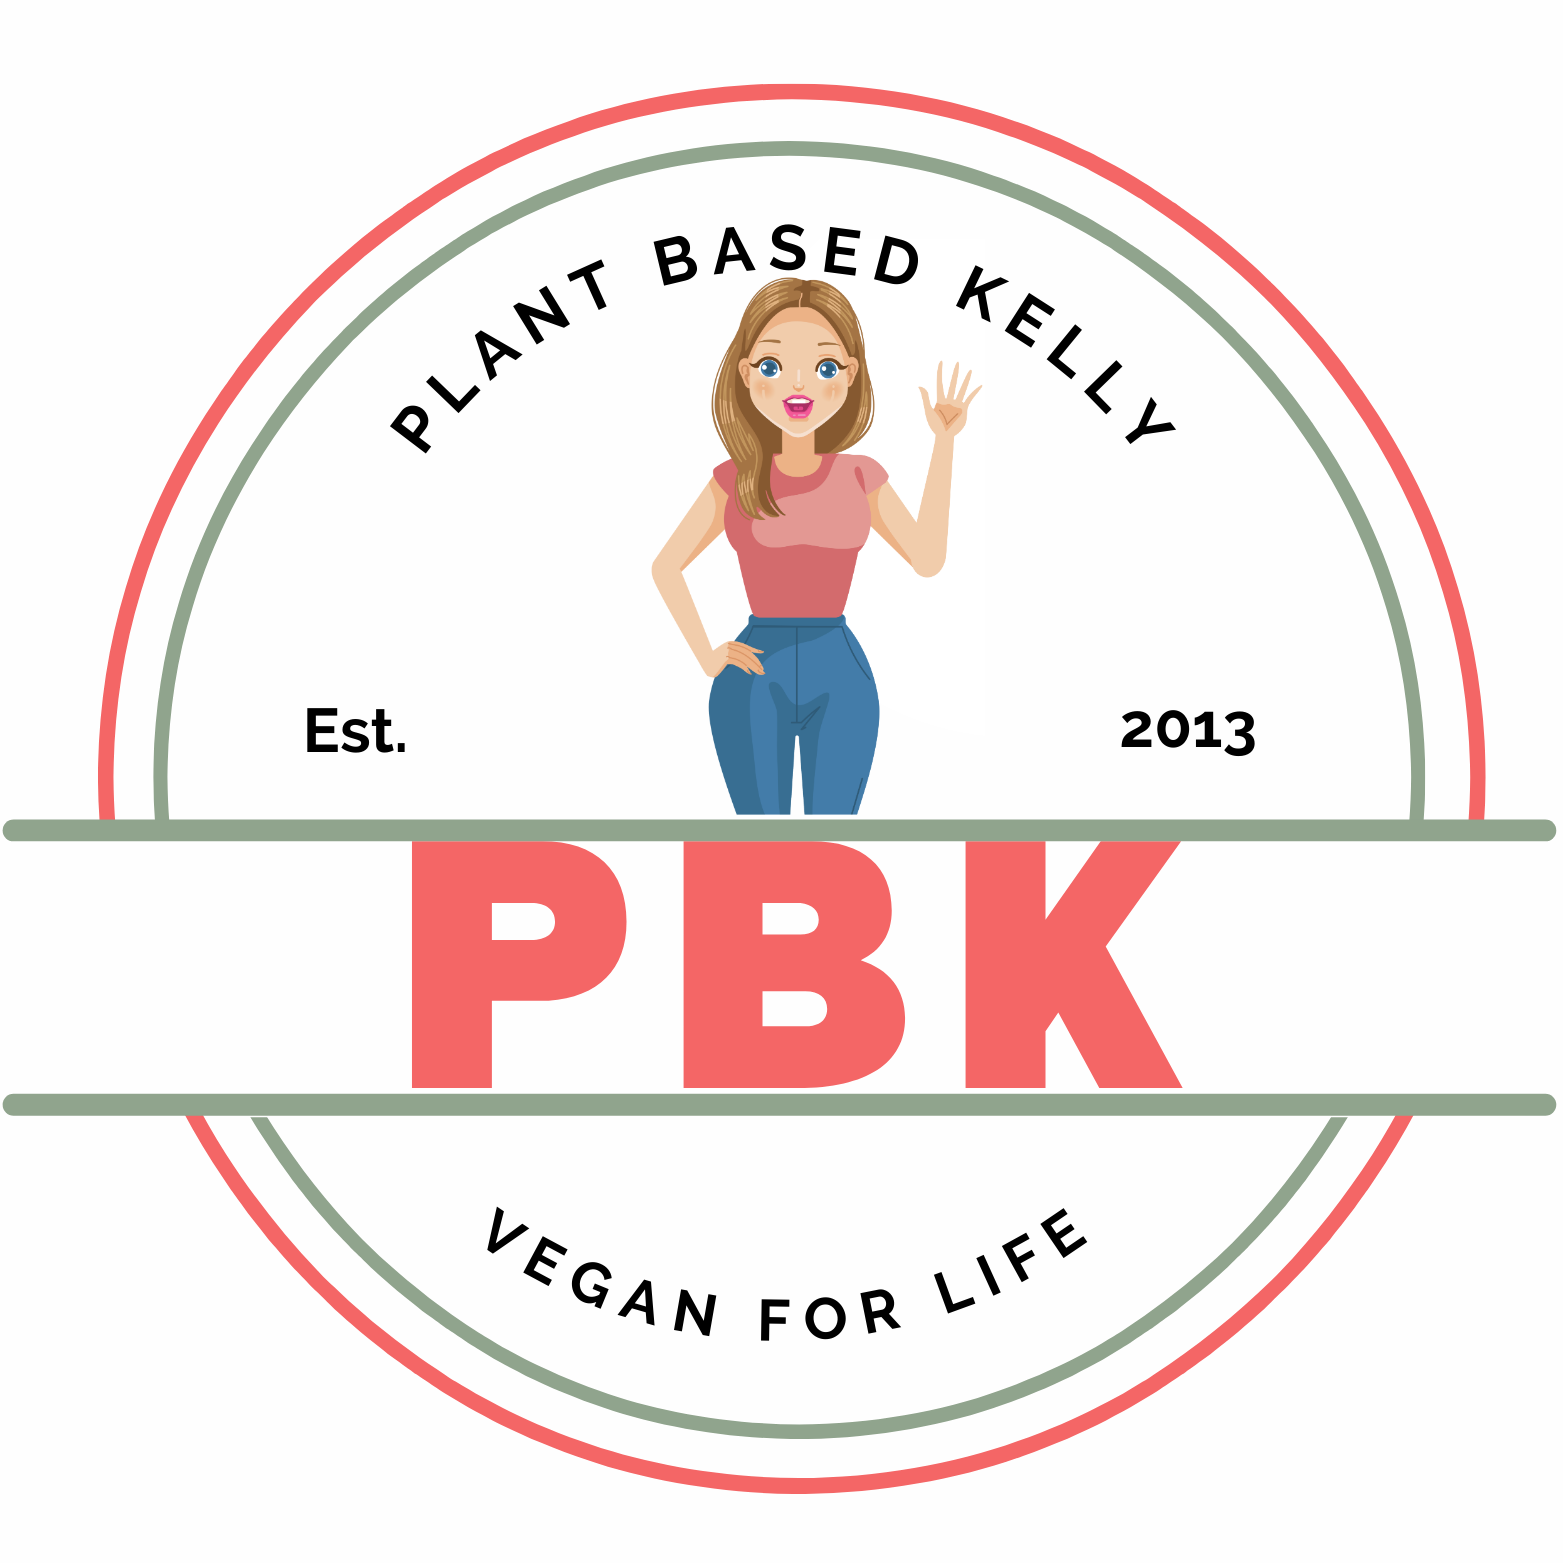 Plant Based Kelly's logo features a curvy girl wavy in a friendly way to welcome all those who want to learn about vegan weight loss